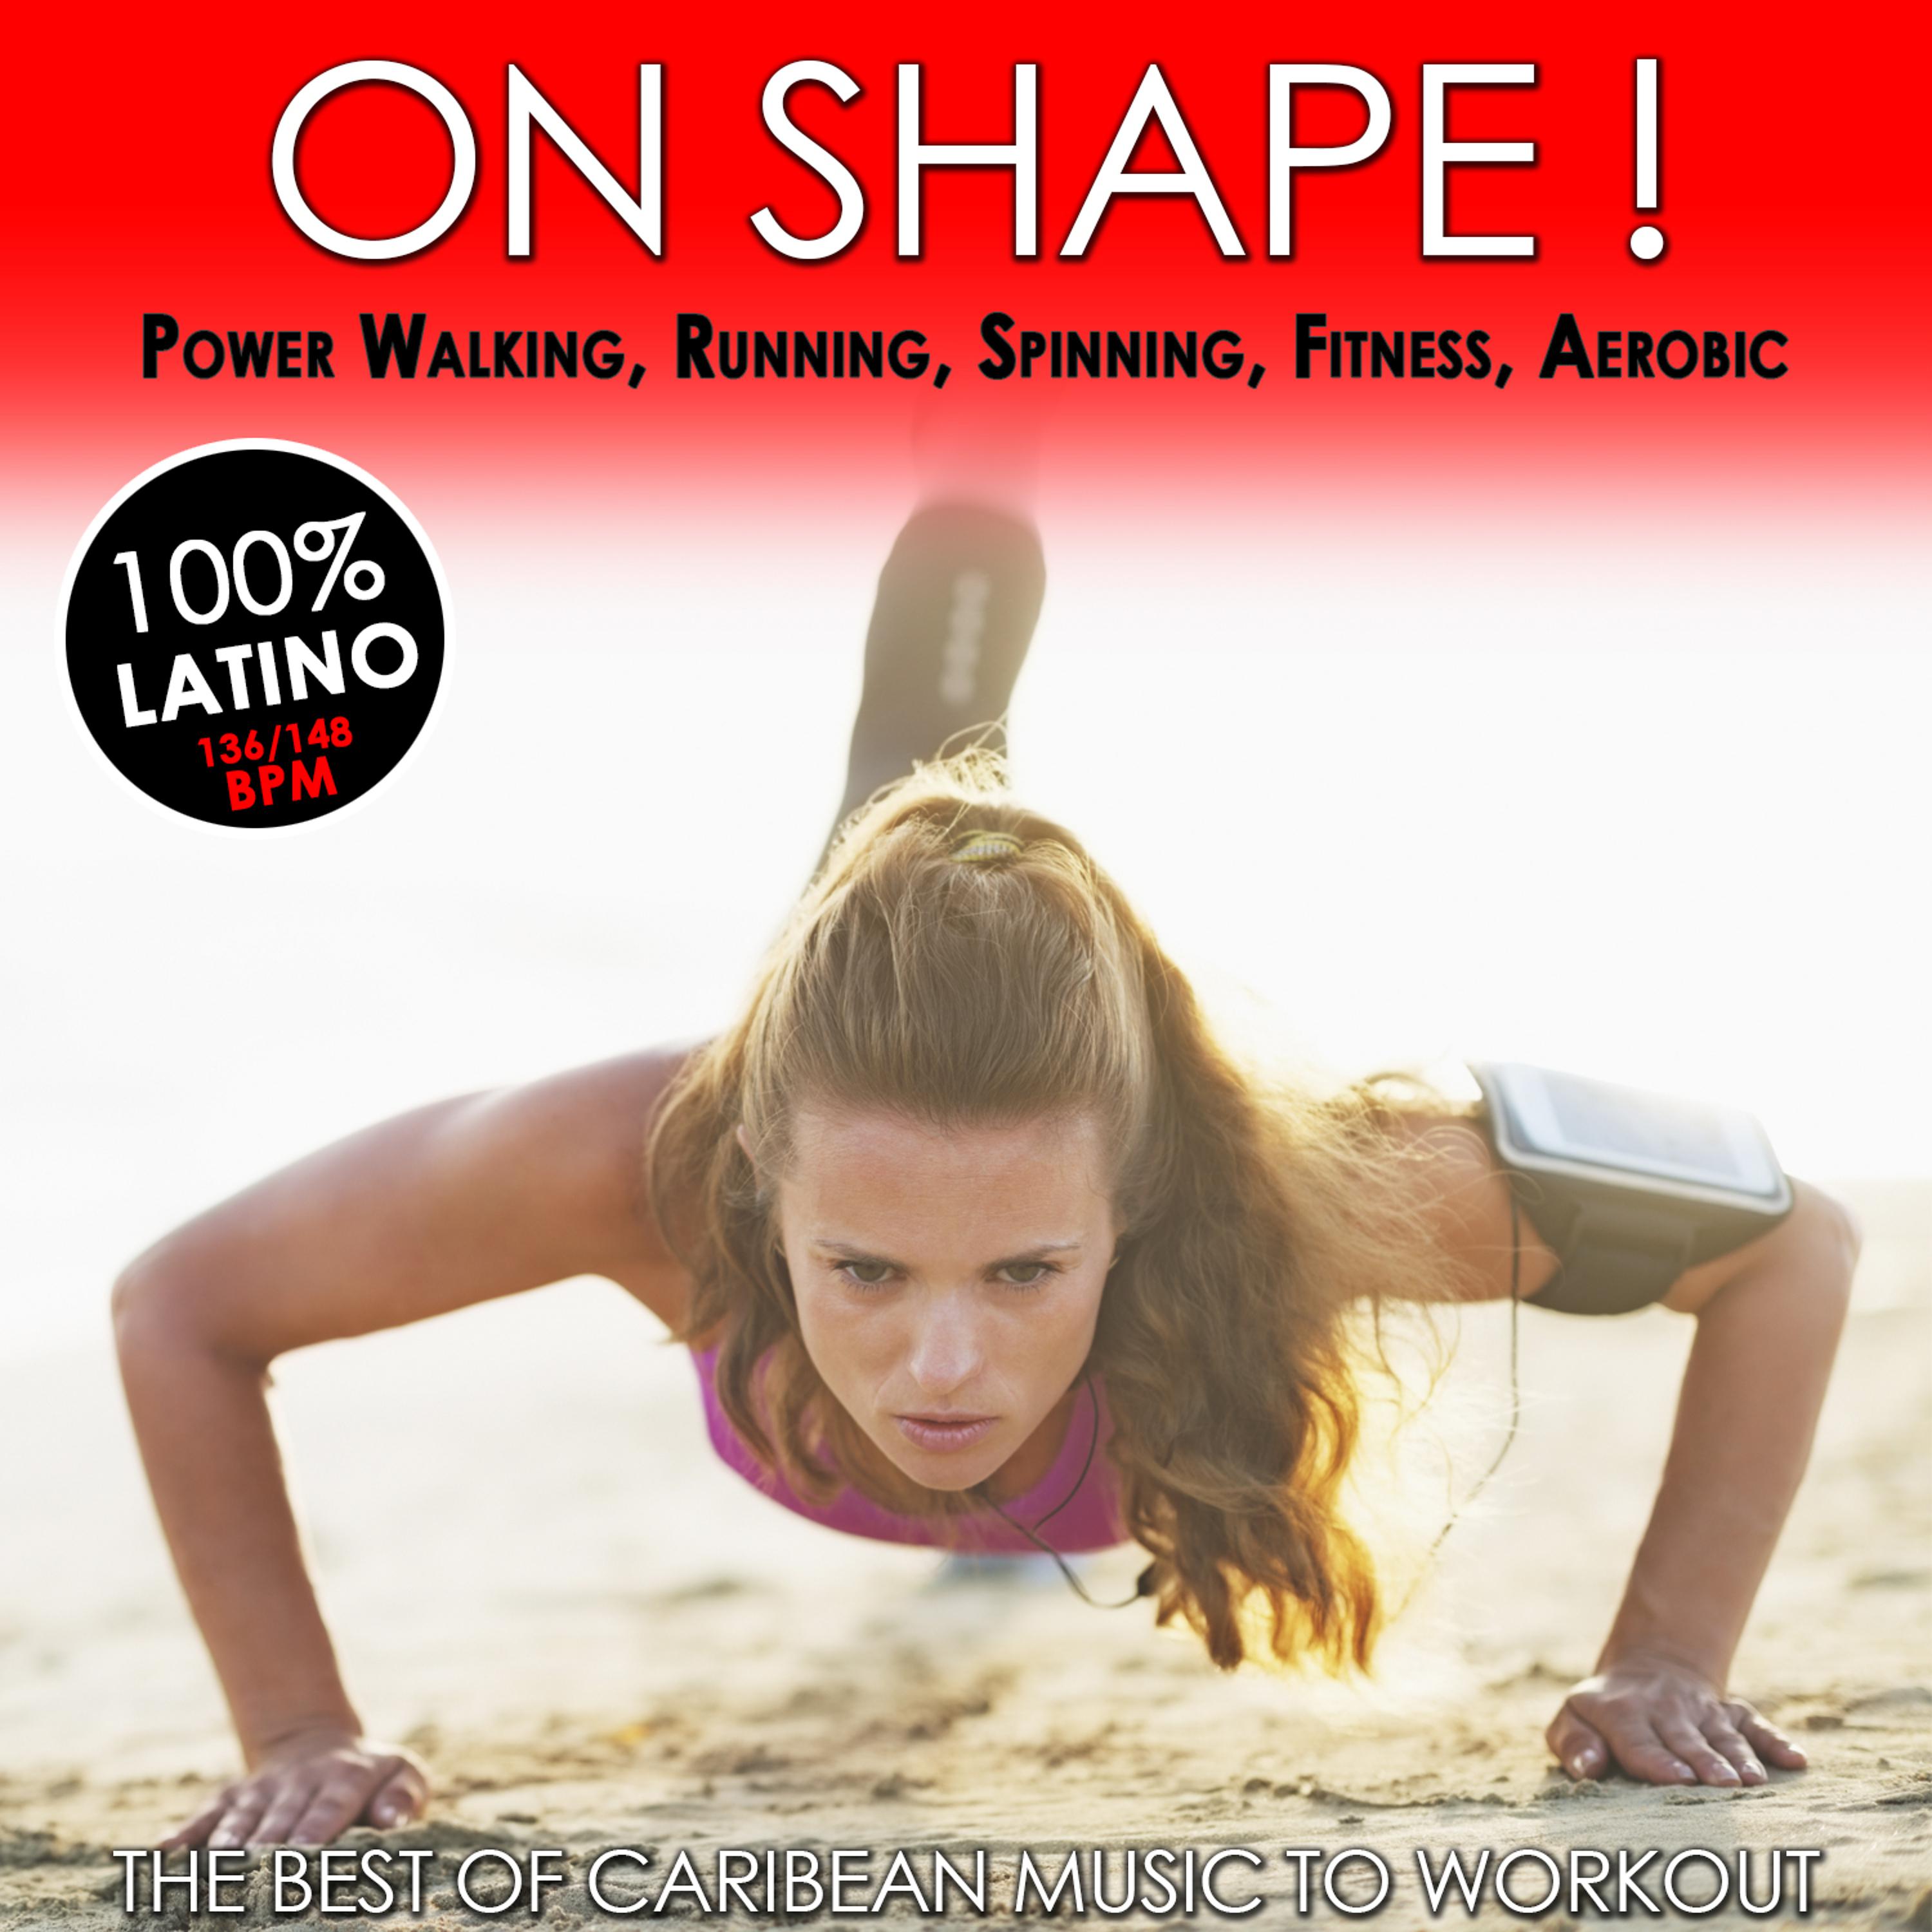 Постер альбома On Shape! The Best of Caribean Music to Workout 100% Latino for Power Walking, Running, Spinning, Fitness, Aerobic (136 - 148 Beats Per Minute)